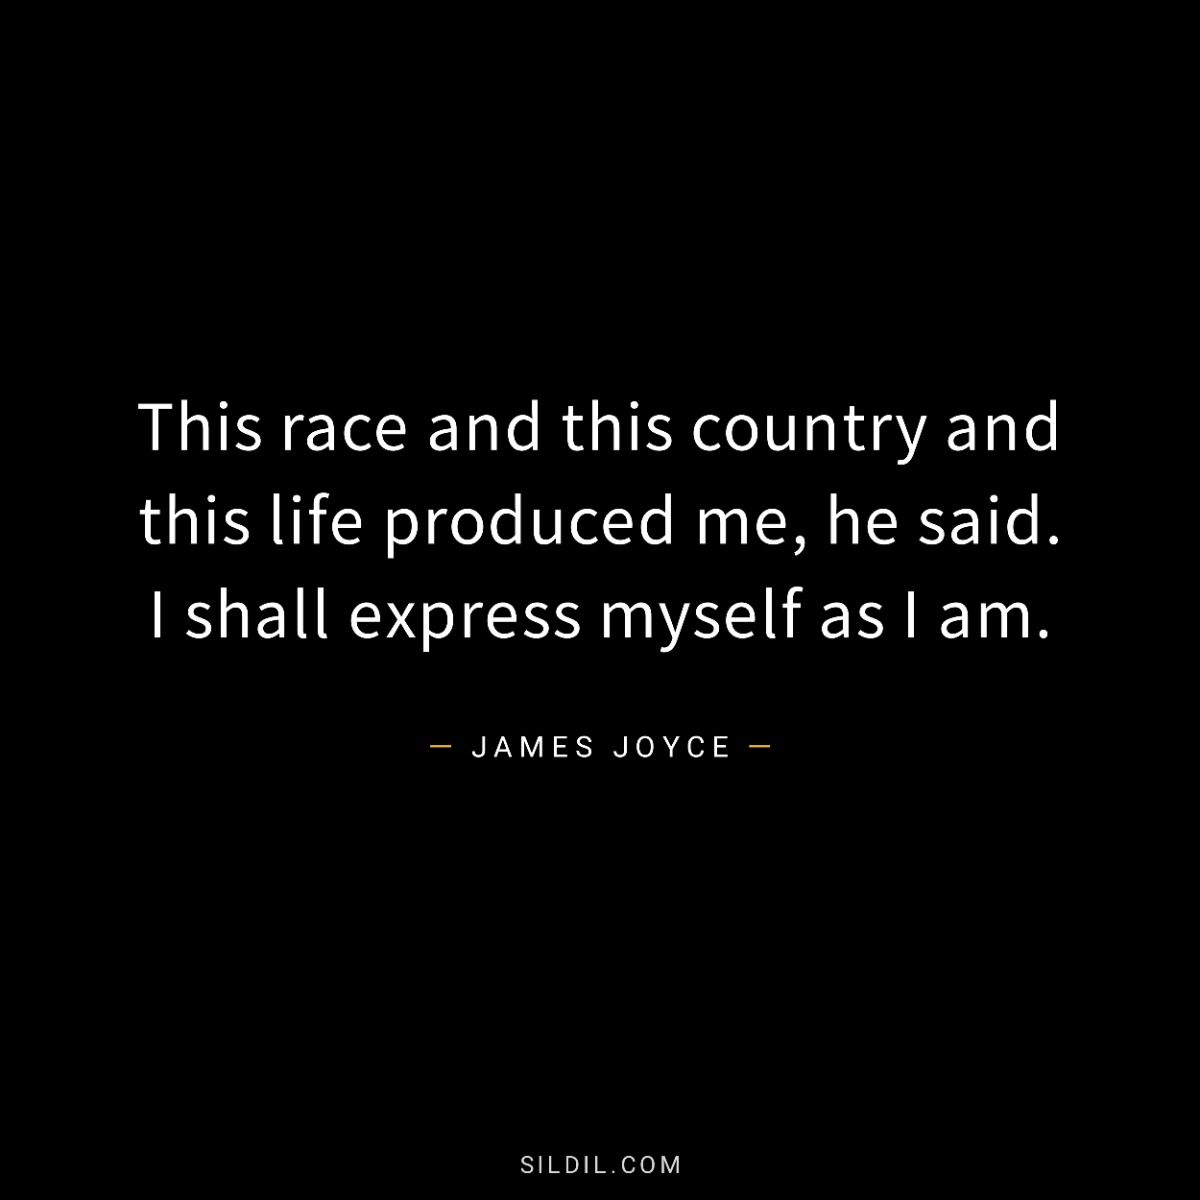 This race and this country and this life produced me, he said. I shall express myself as I am.